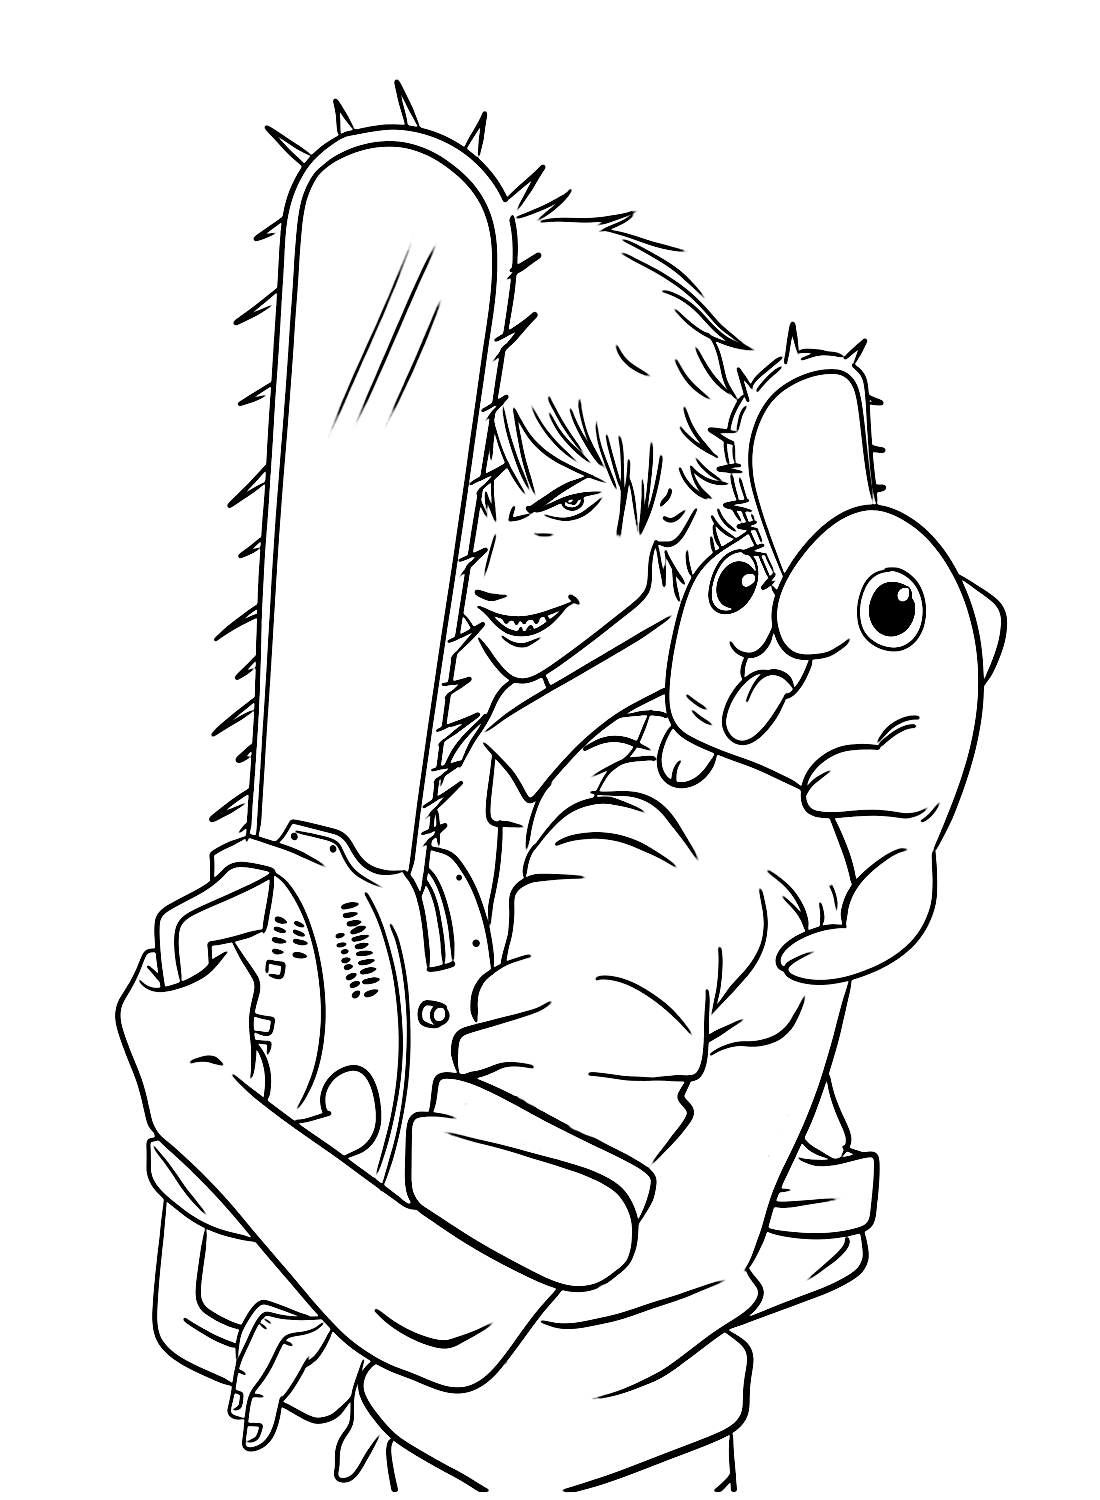 Denji Coloring Pages - Coloring Pages ...